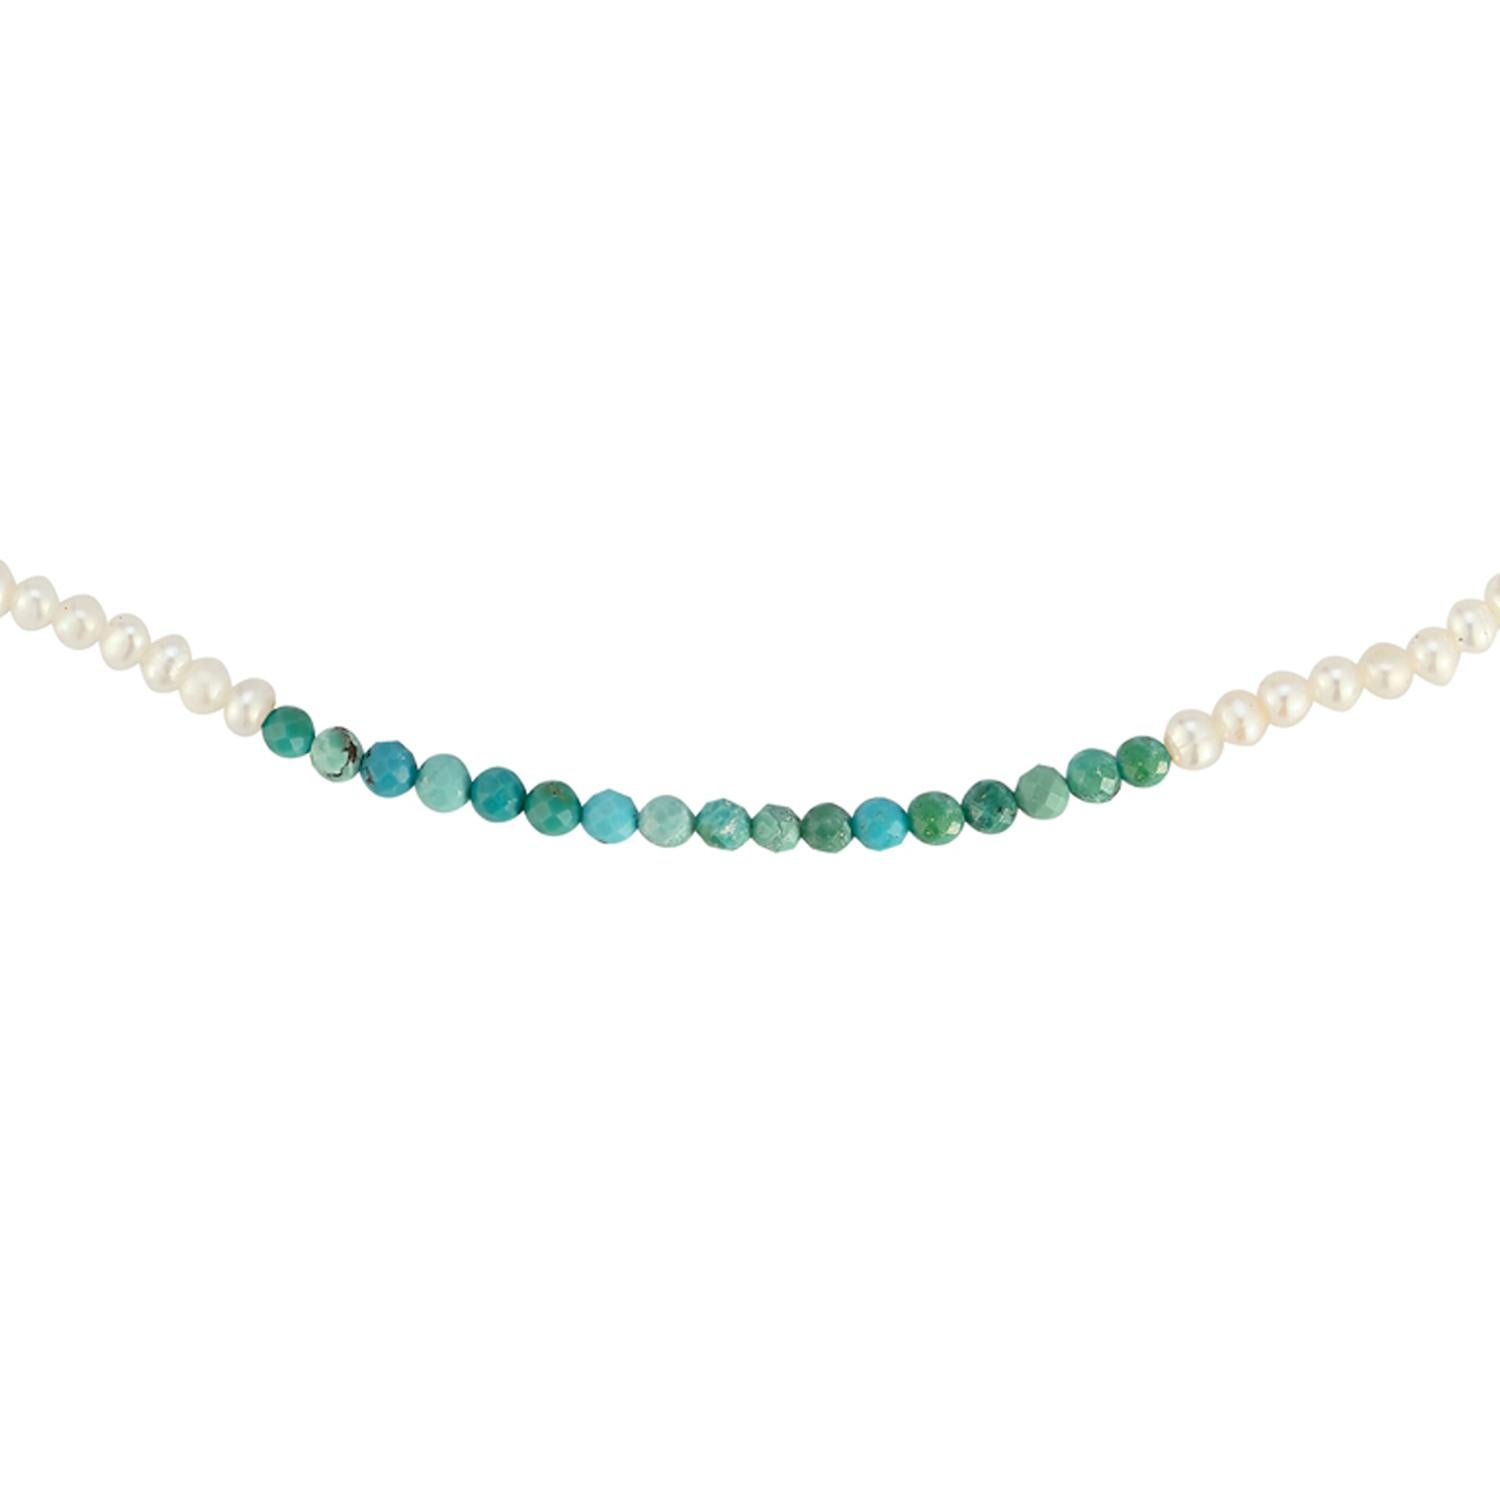 This is no ordinary pearl choker with a pop of color in the form of color block with faceted semi-precious Turquoise stones. A fun layering piece for all seasons if you like to layer your necklaces with beaded pieces and chains.

Inspired by the